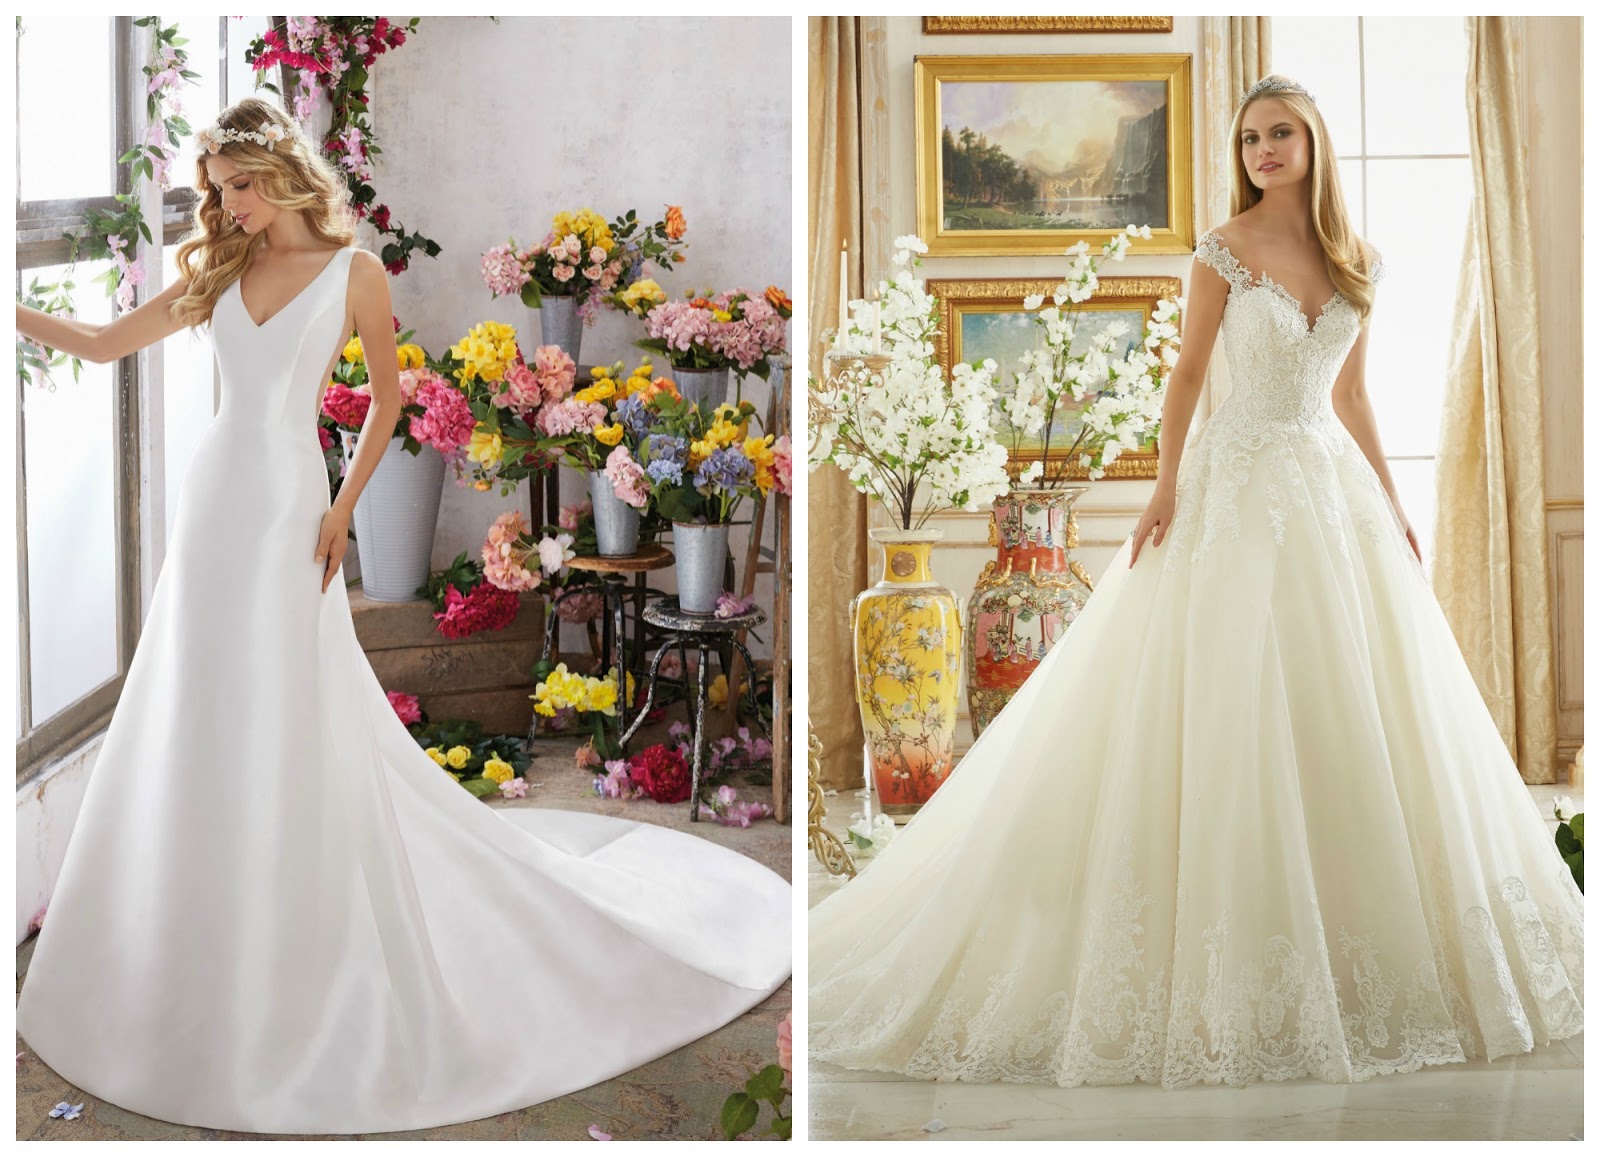 Brides of America Online Store  Wedding  Dresses  Come In 